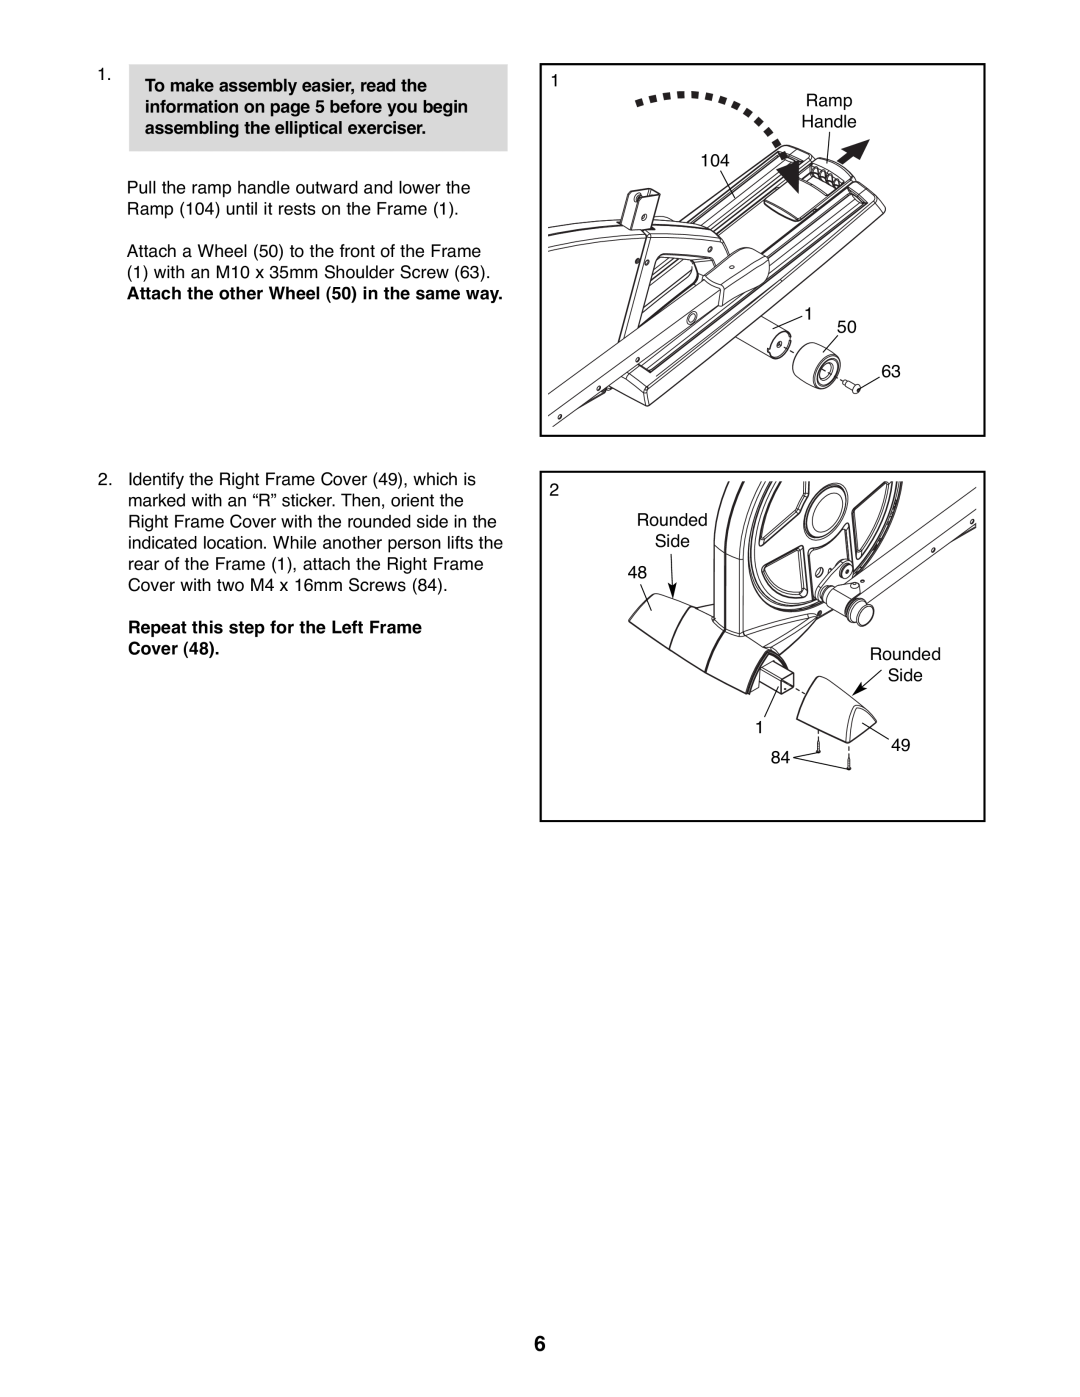 ProForm 831.23744.0 user manual Attach the other Wheel 50 in the same way, Repeat this step for the Left Frame Cover 